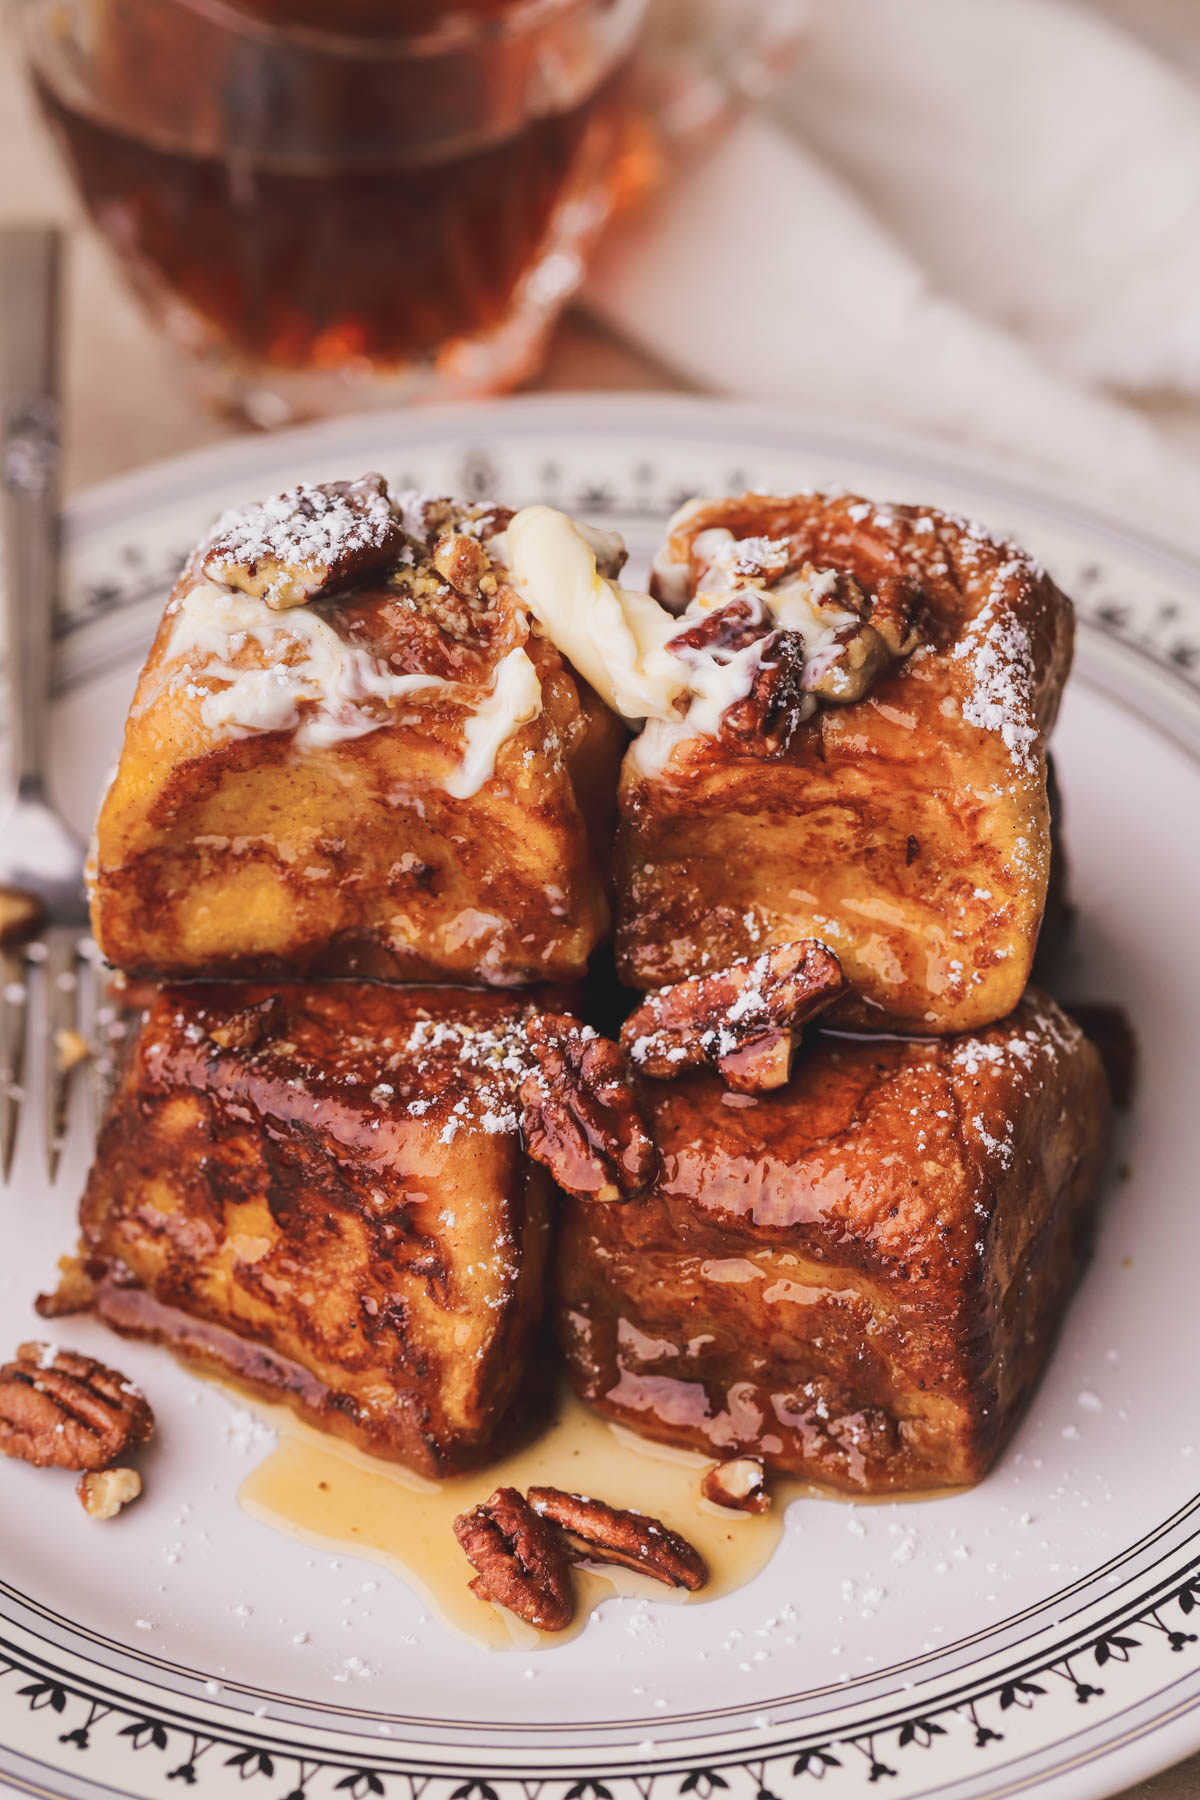 Hawaiian bread French toast drizzled with warm maple syrup, candied pecans and butter.  